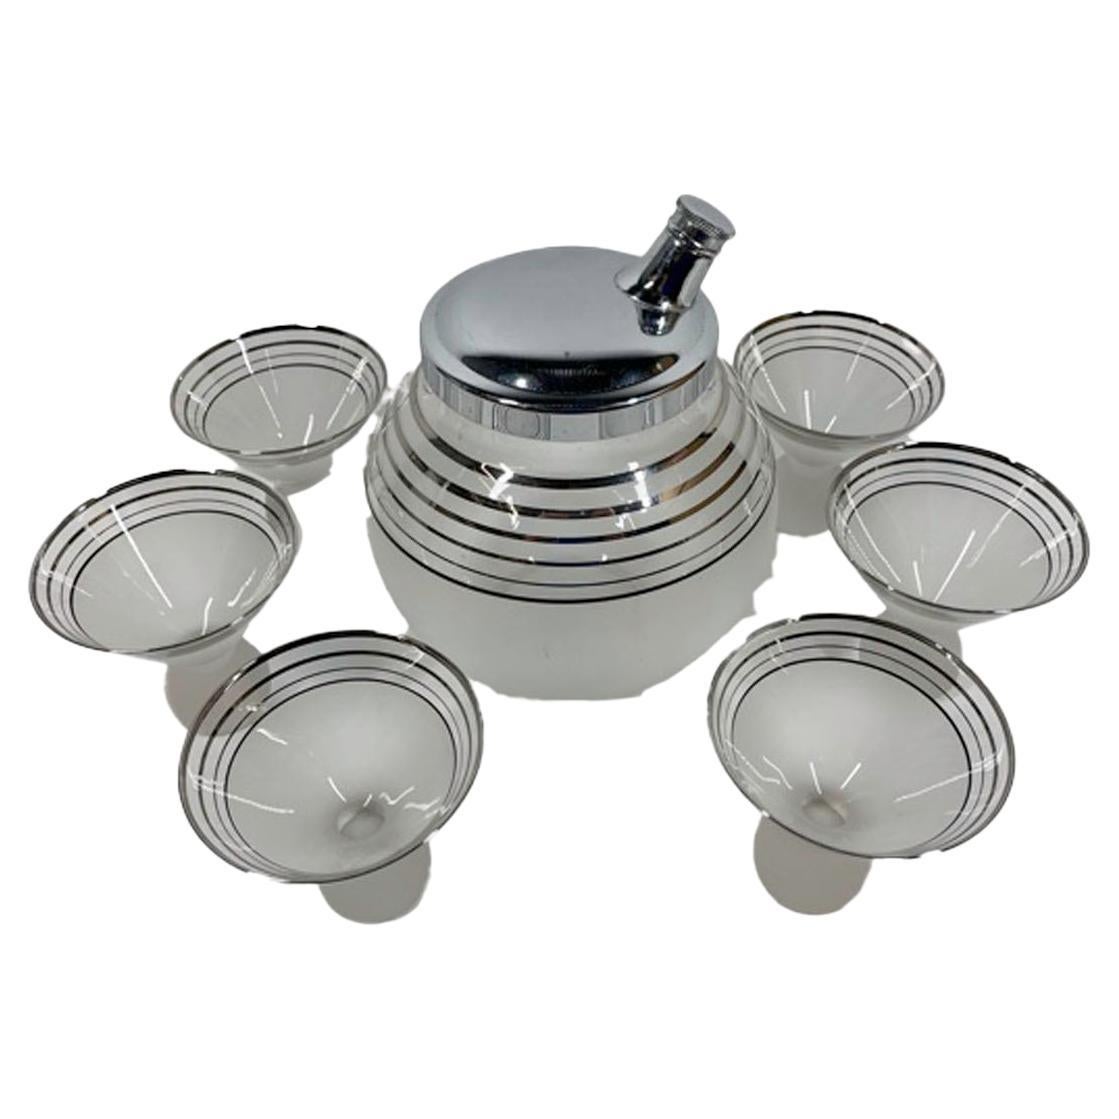 Art Deco cocktail shaker set with a ball-form shaker and 6 cocktail glasses with cone shaped bowls on ball feet. Each piece with silver bands on clear glass above a frosted lower section.